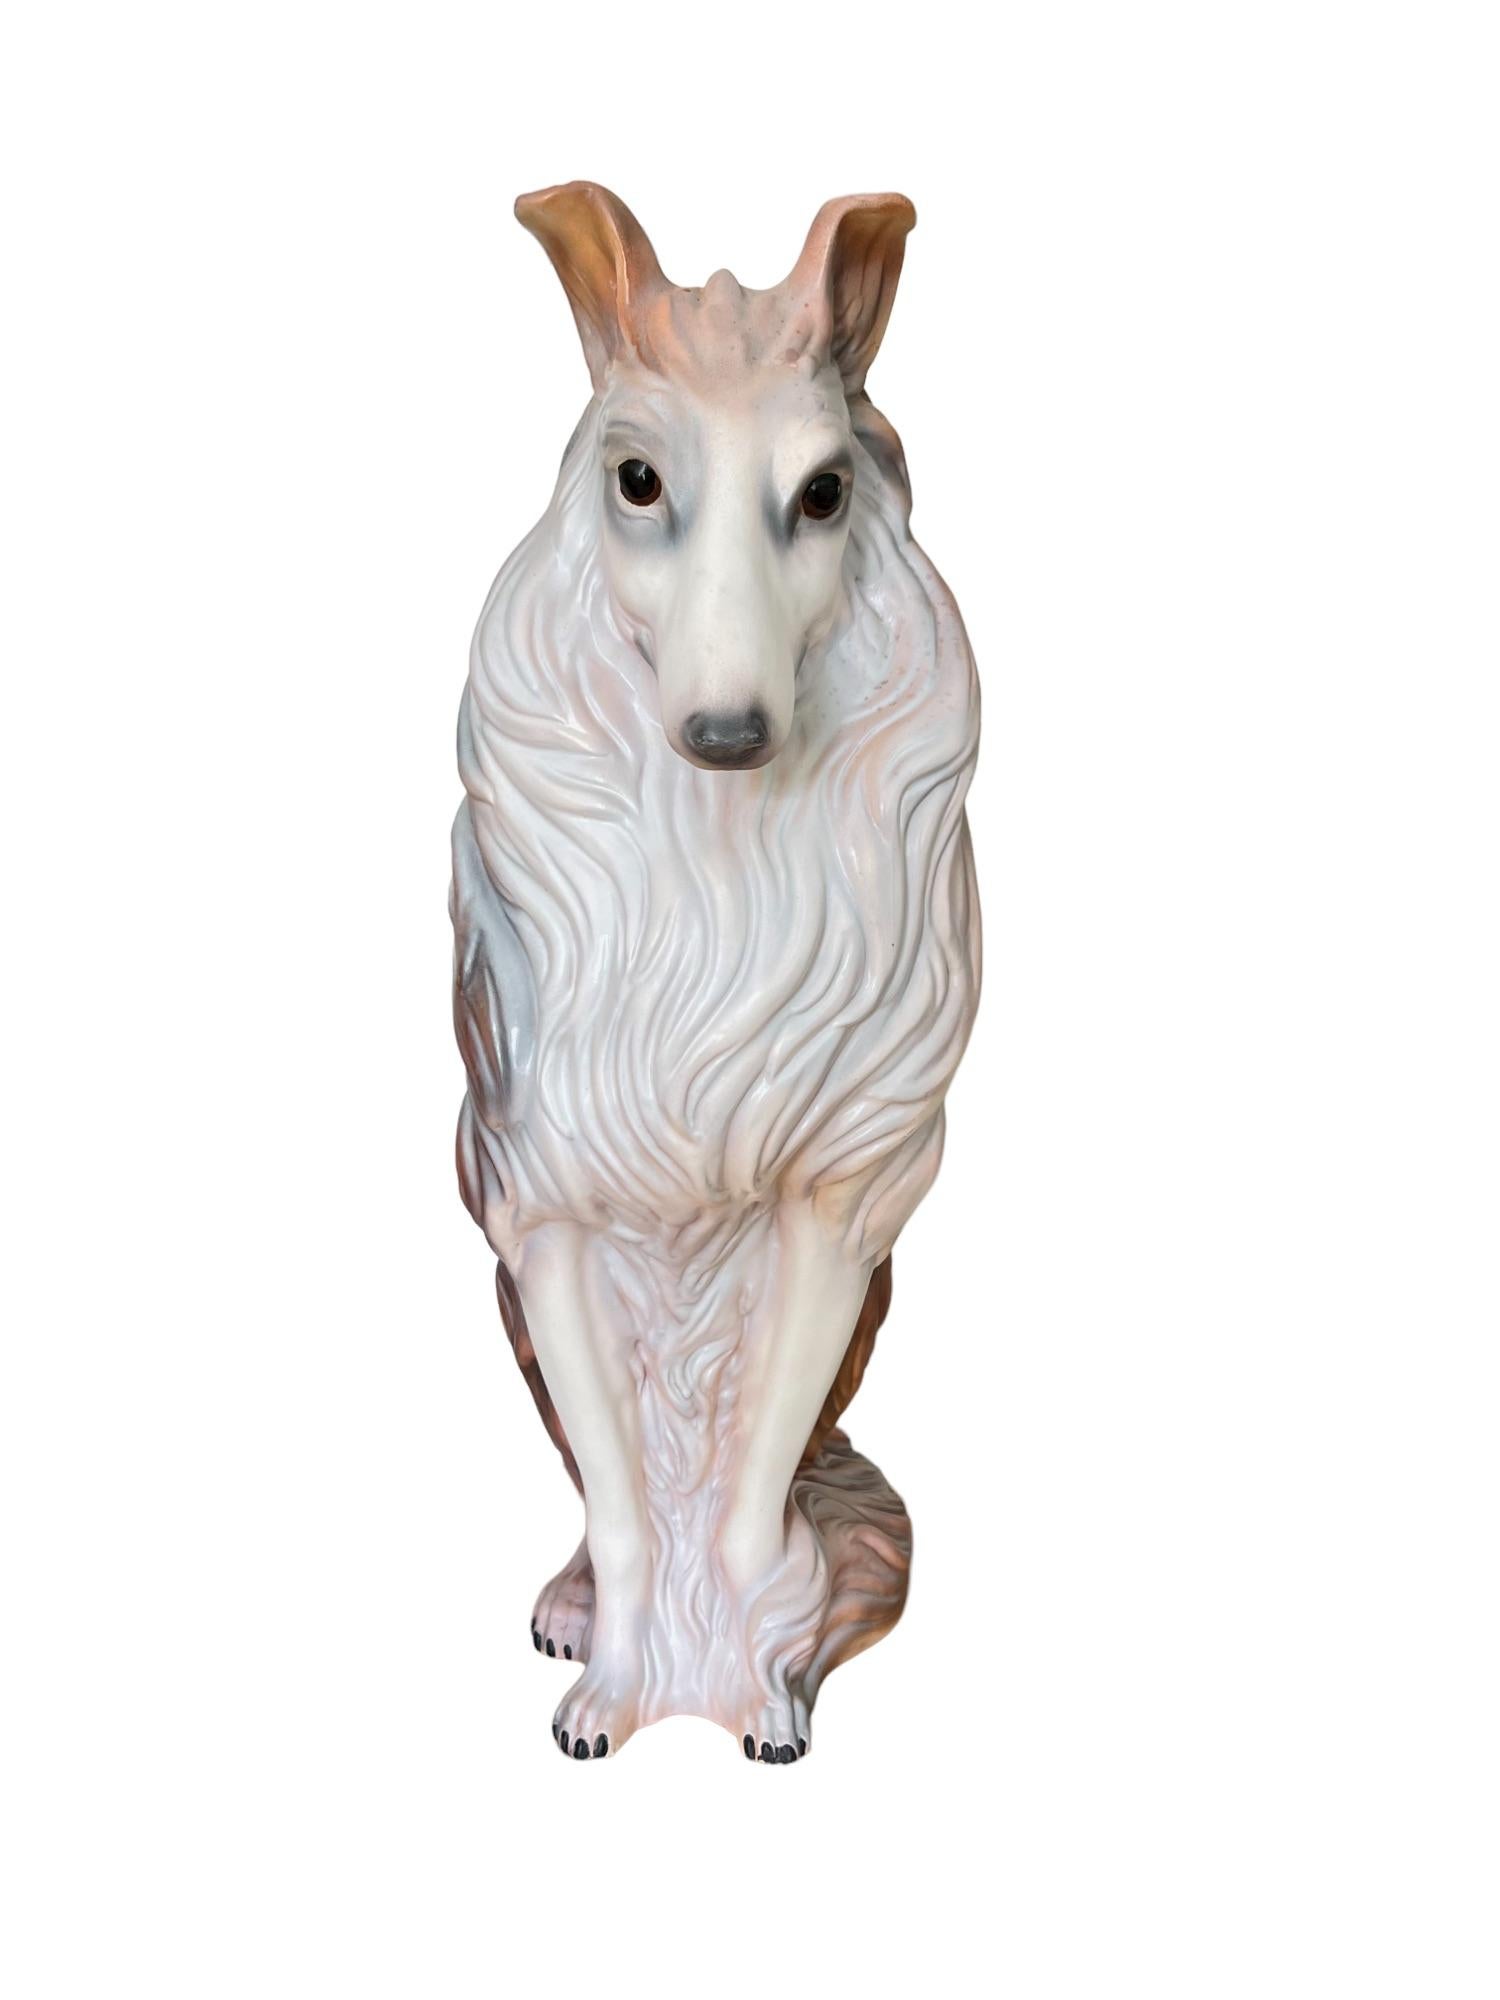 A vintage mid 20th century large scale glazed ceramic signed collie dog statue.

Dimensions: 12